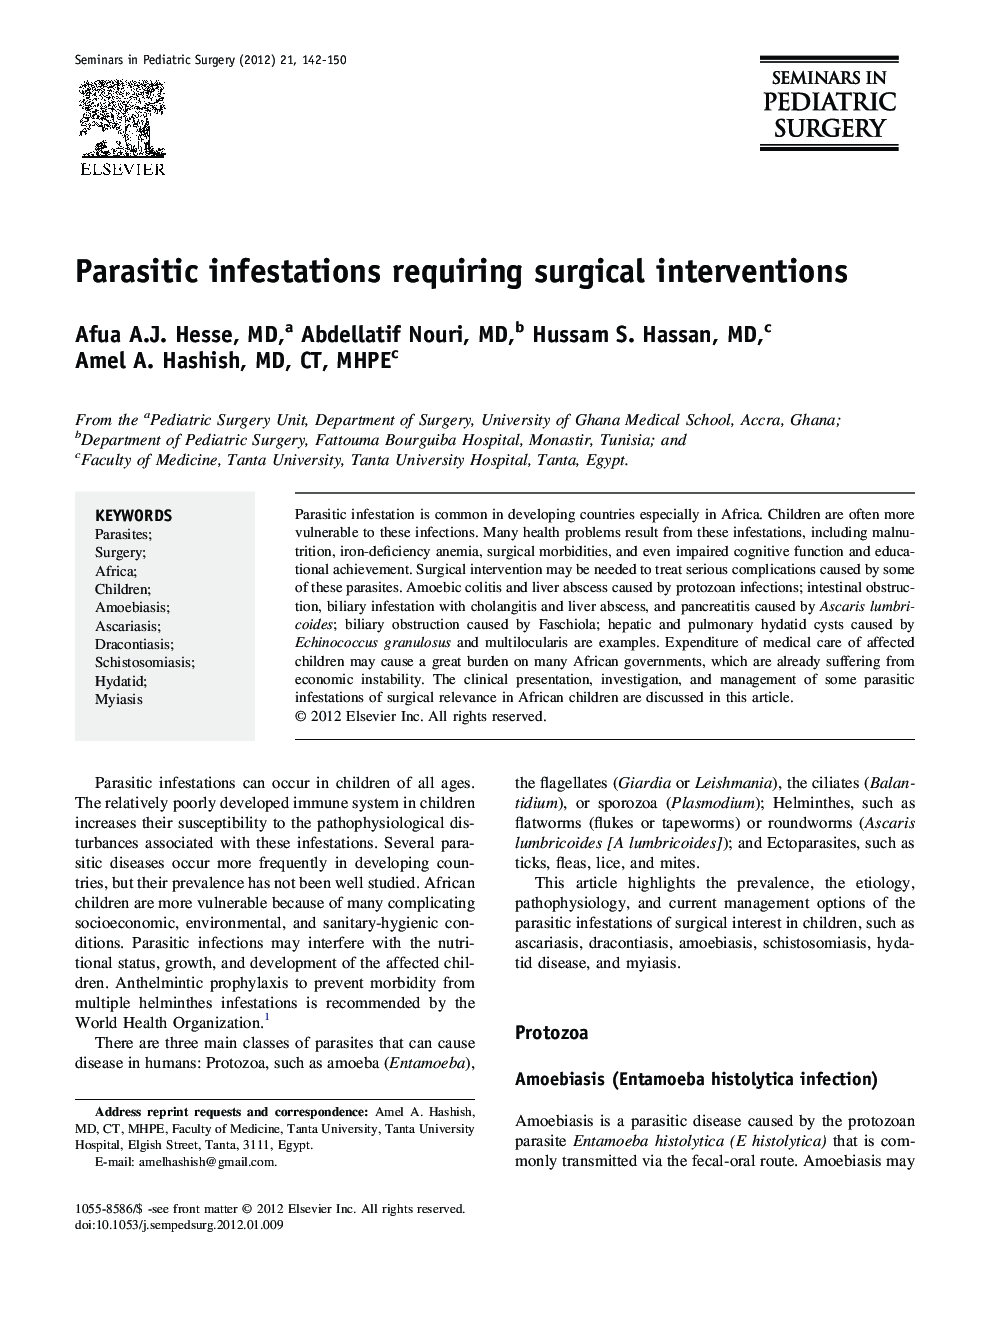 Parasitic infestations requiring surgical interventions